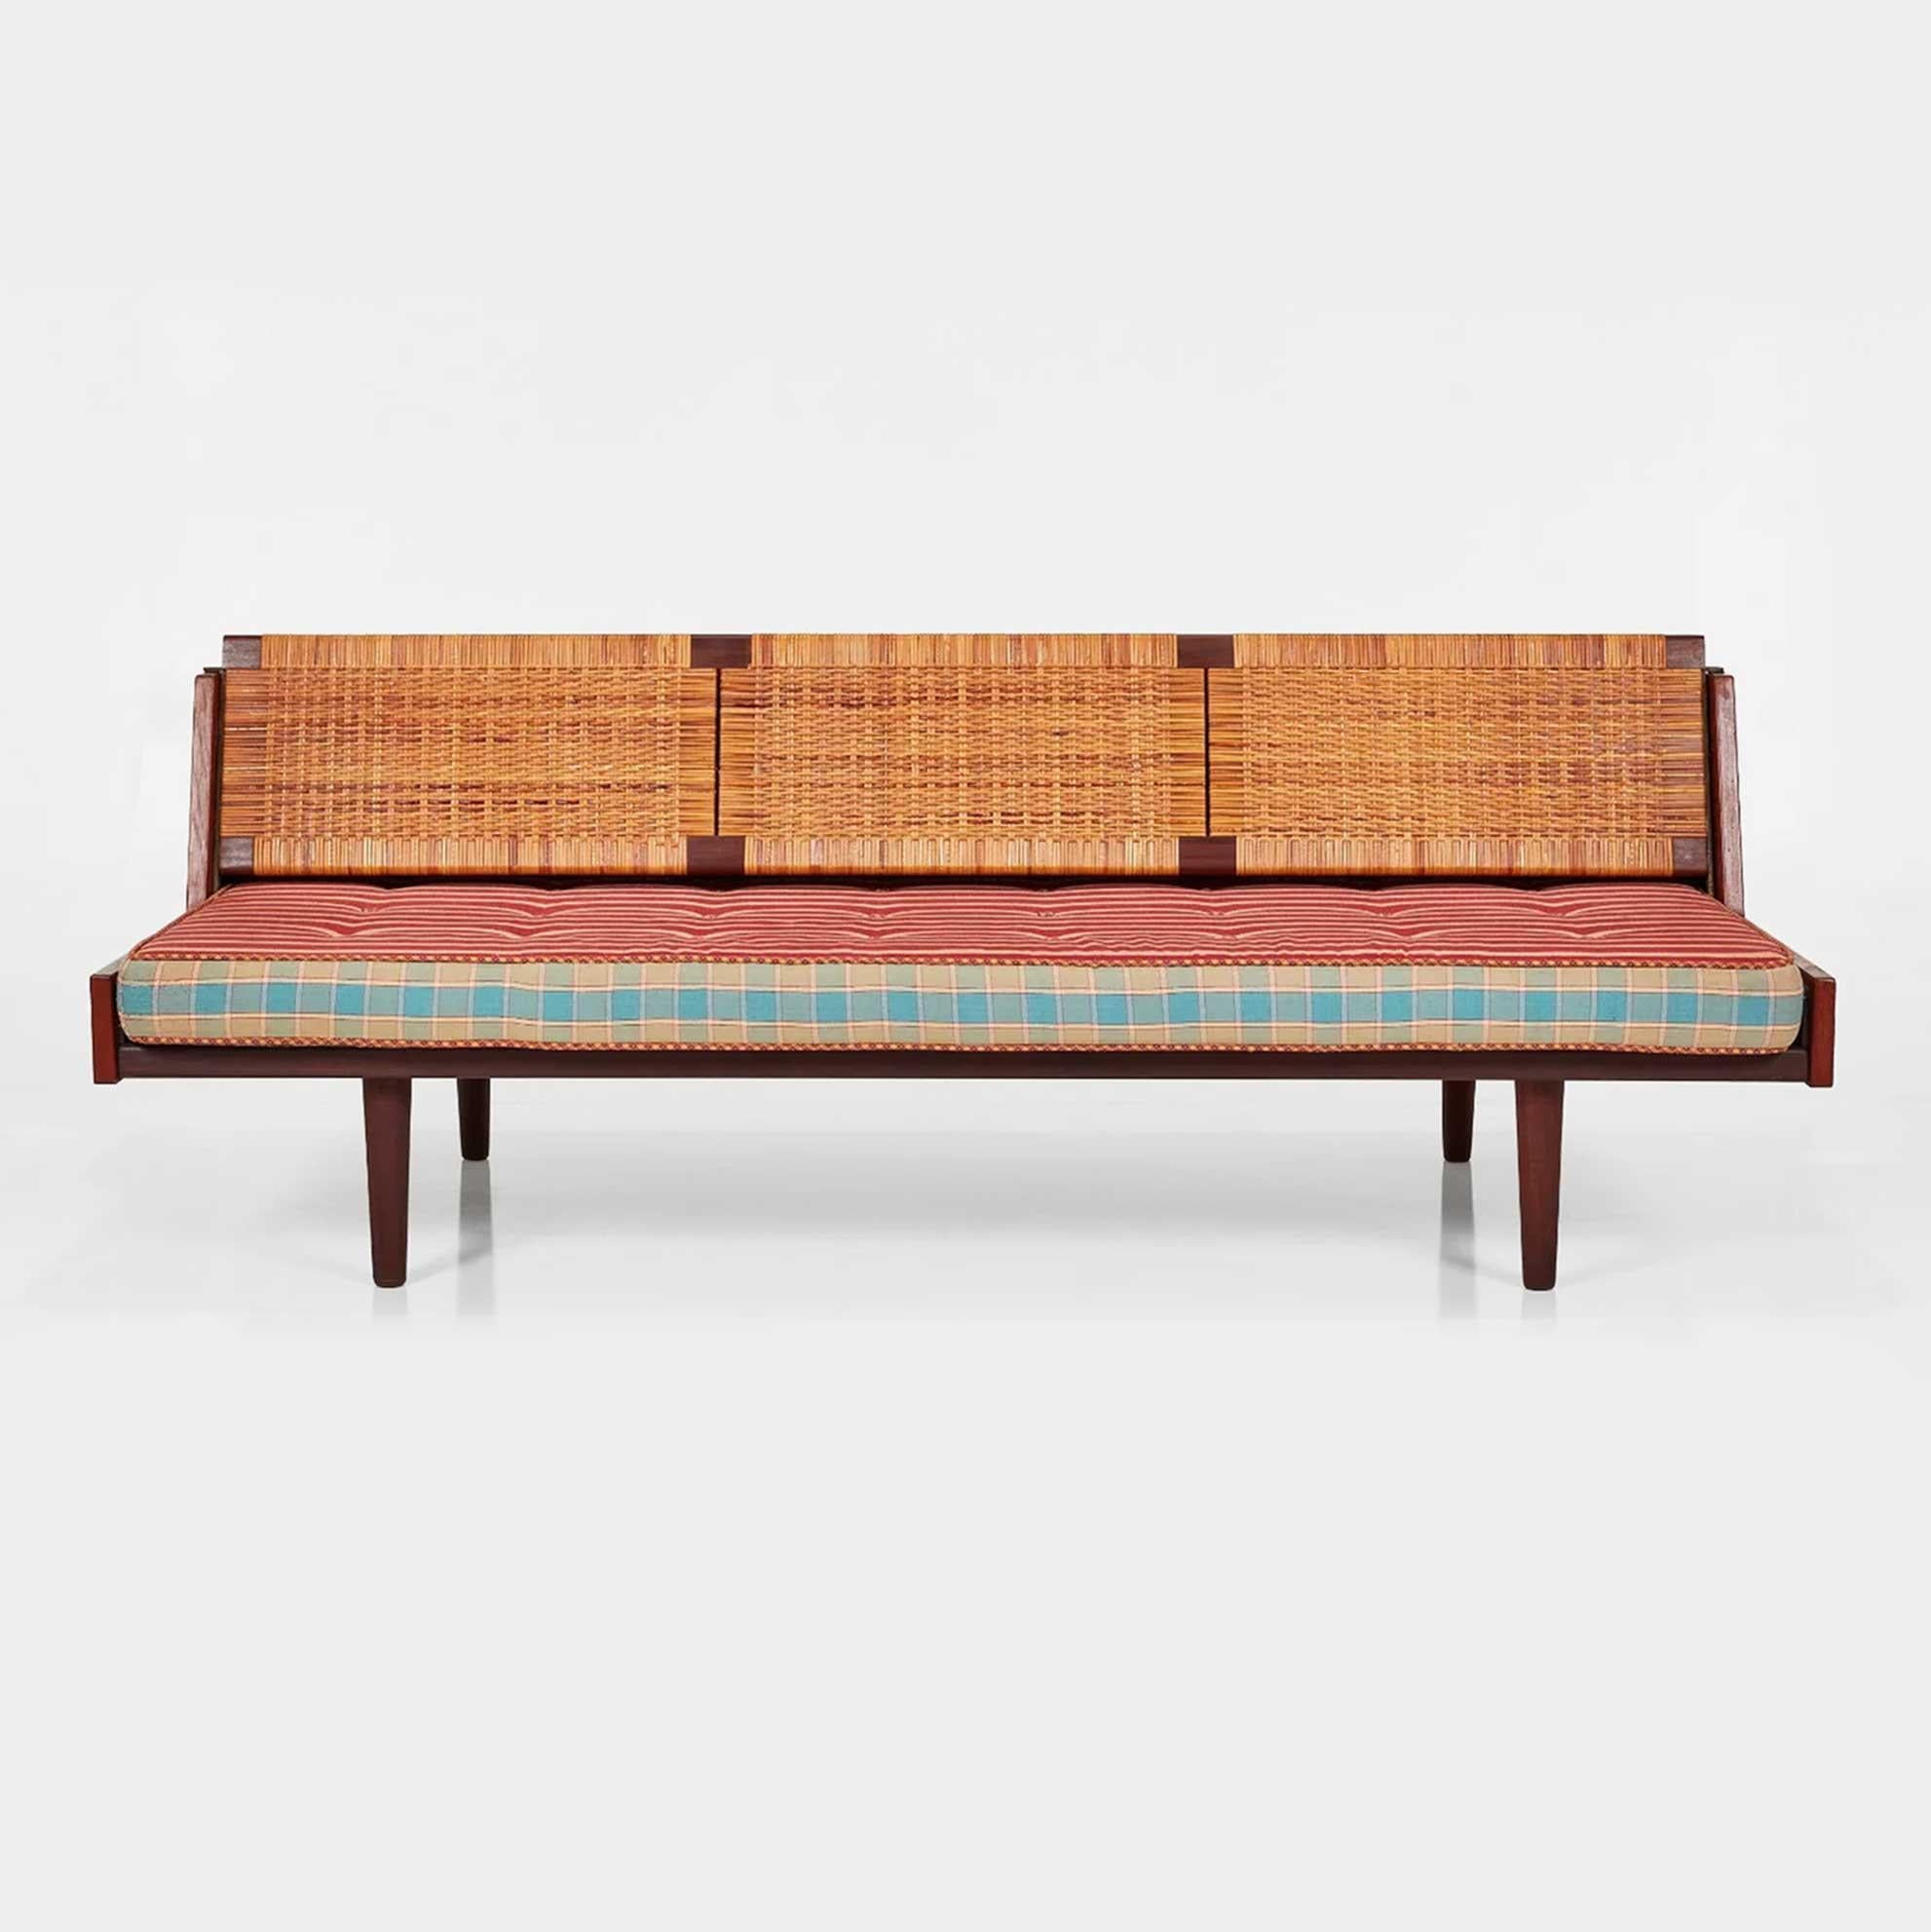 Hans Wegner Model GE 6 Teak and Cane daybed by Getama, Denmark 1960s In Good Condition For Sale In Emeryville, CA